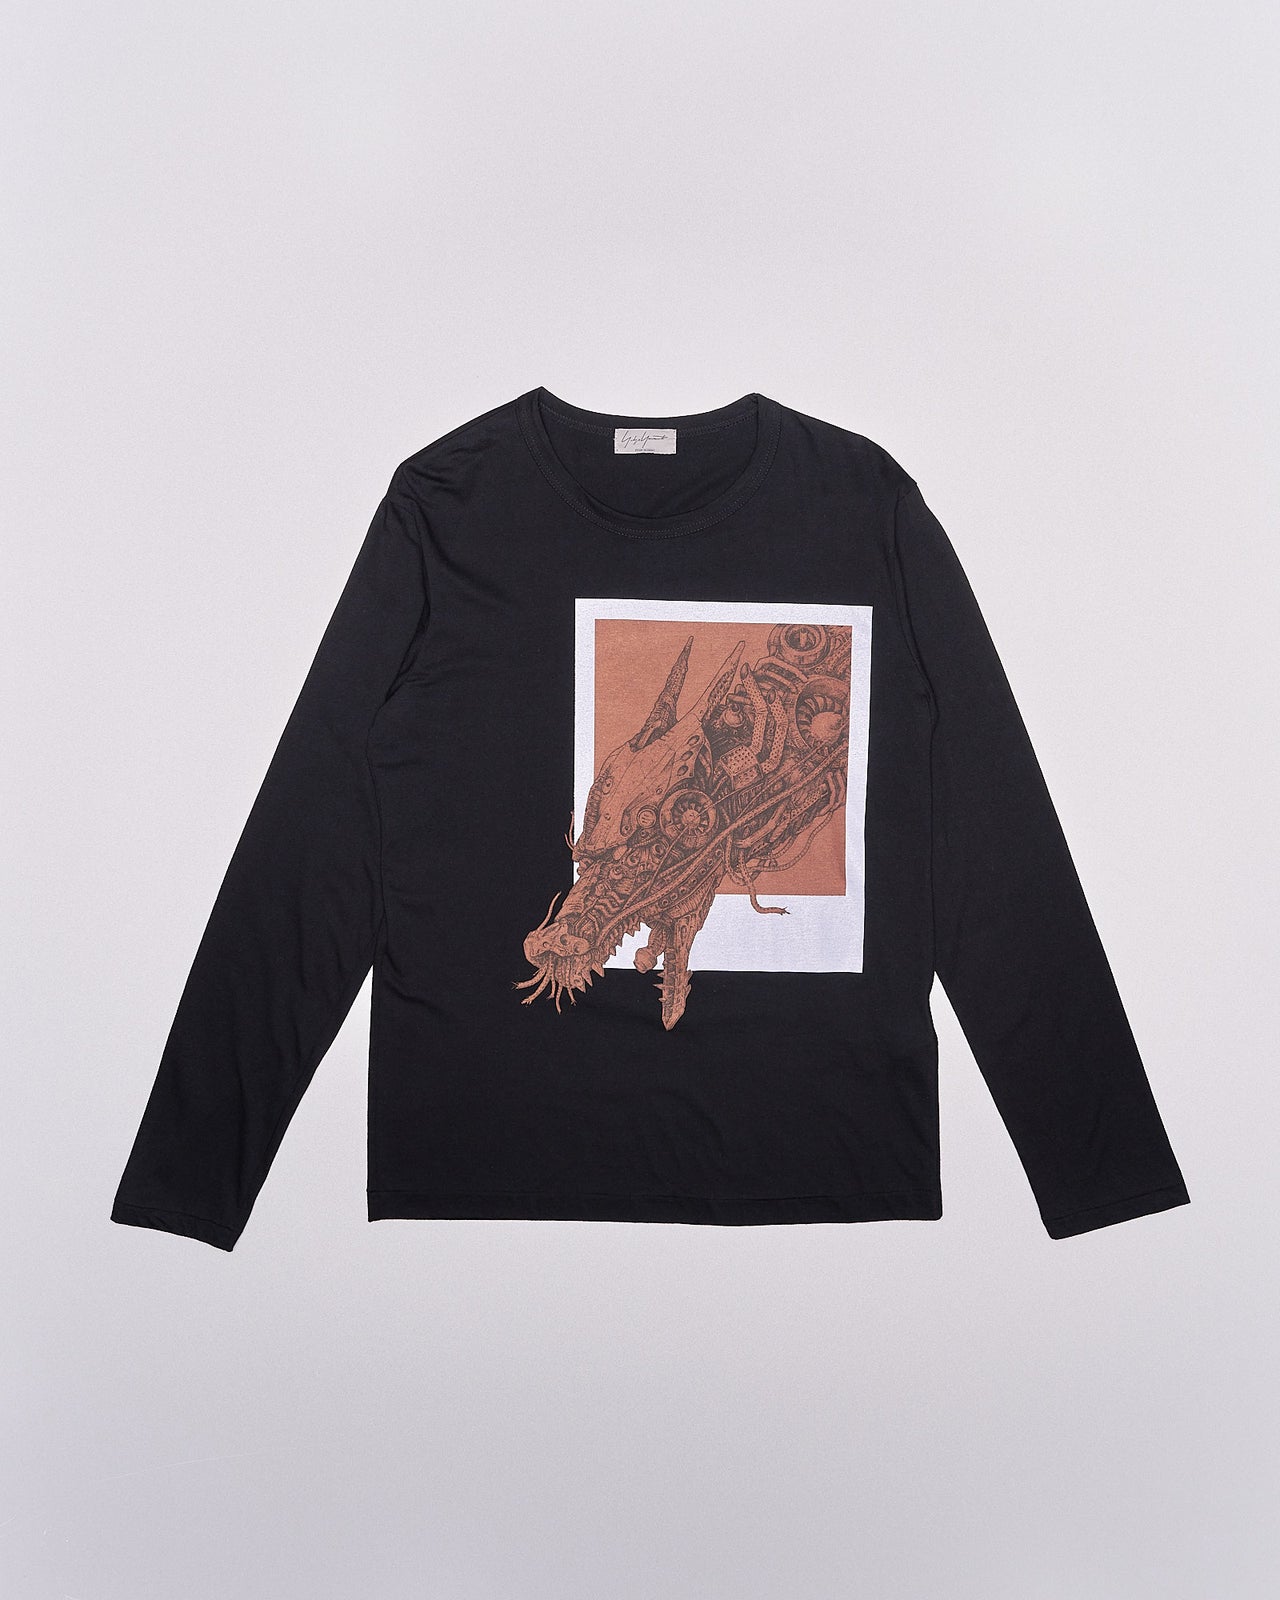 Pour Homme AW 2014 dragon long sleeve t-shirt